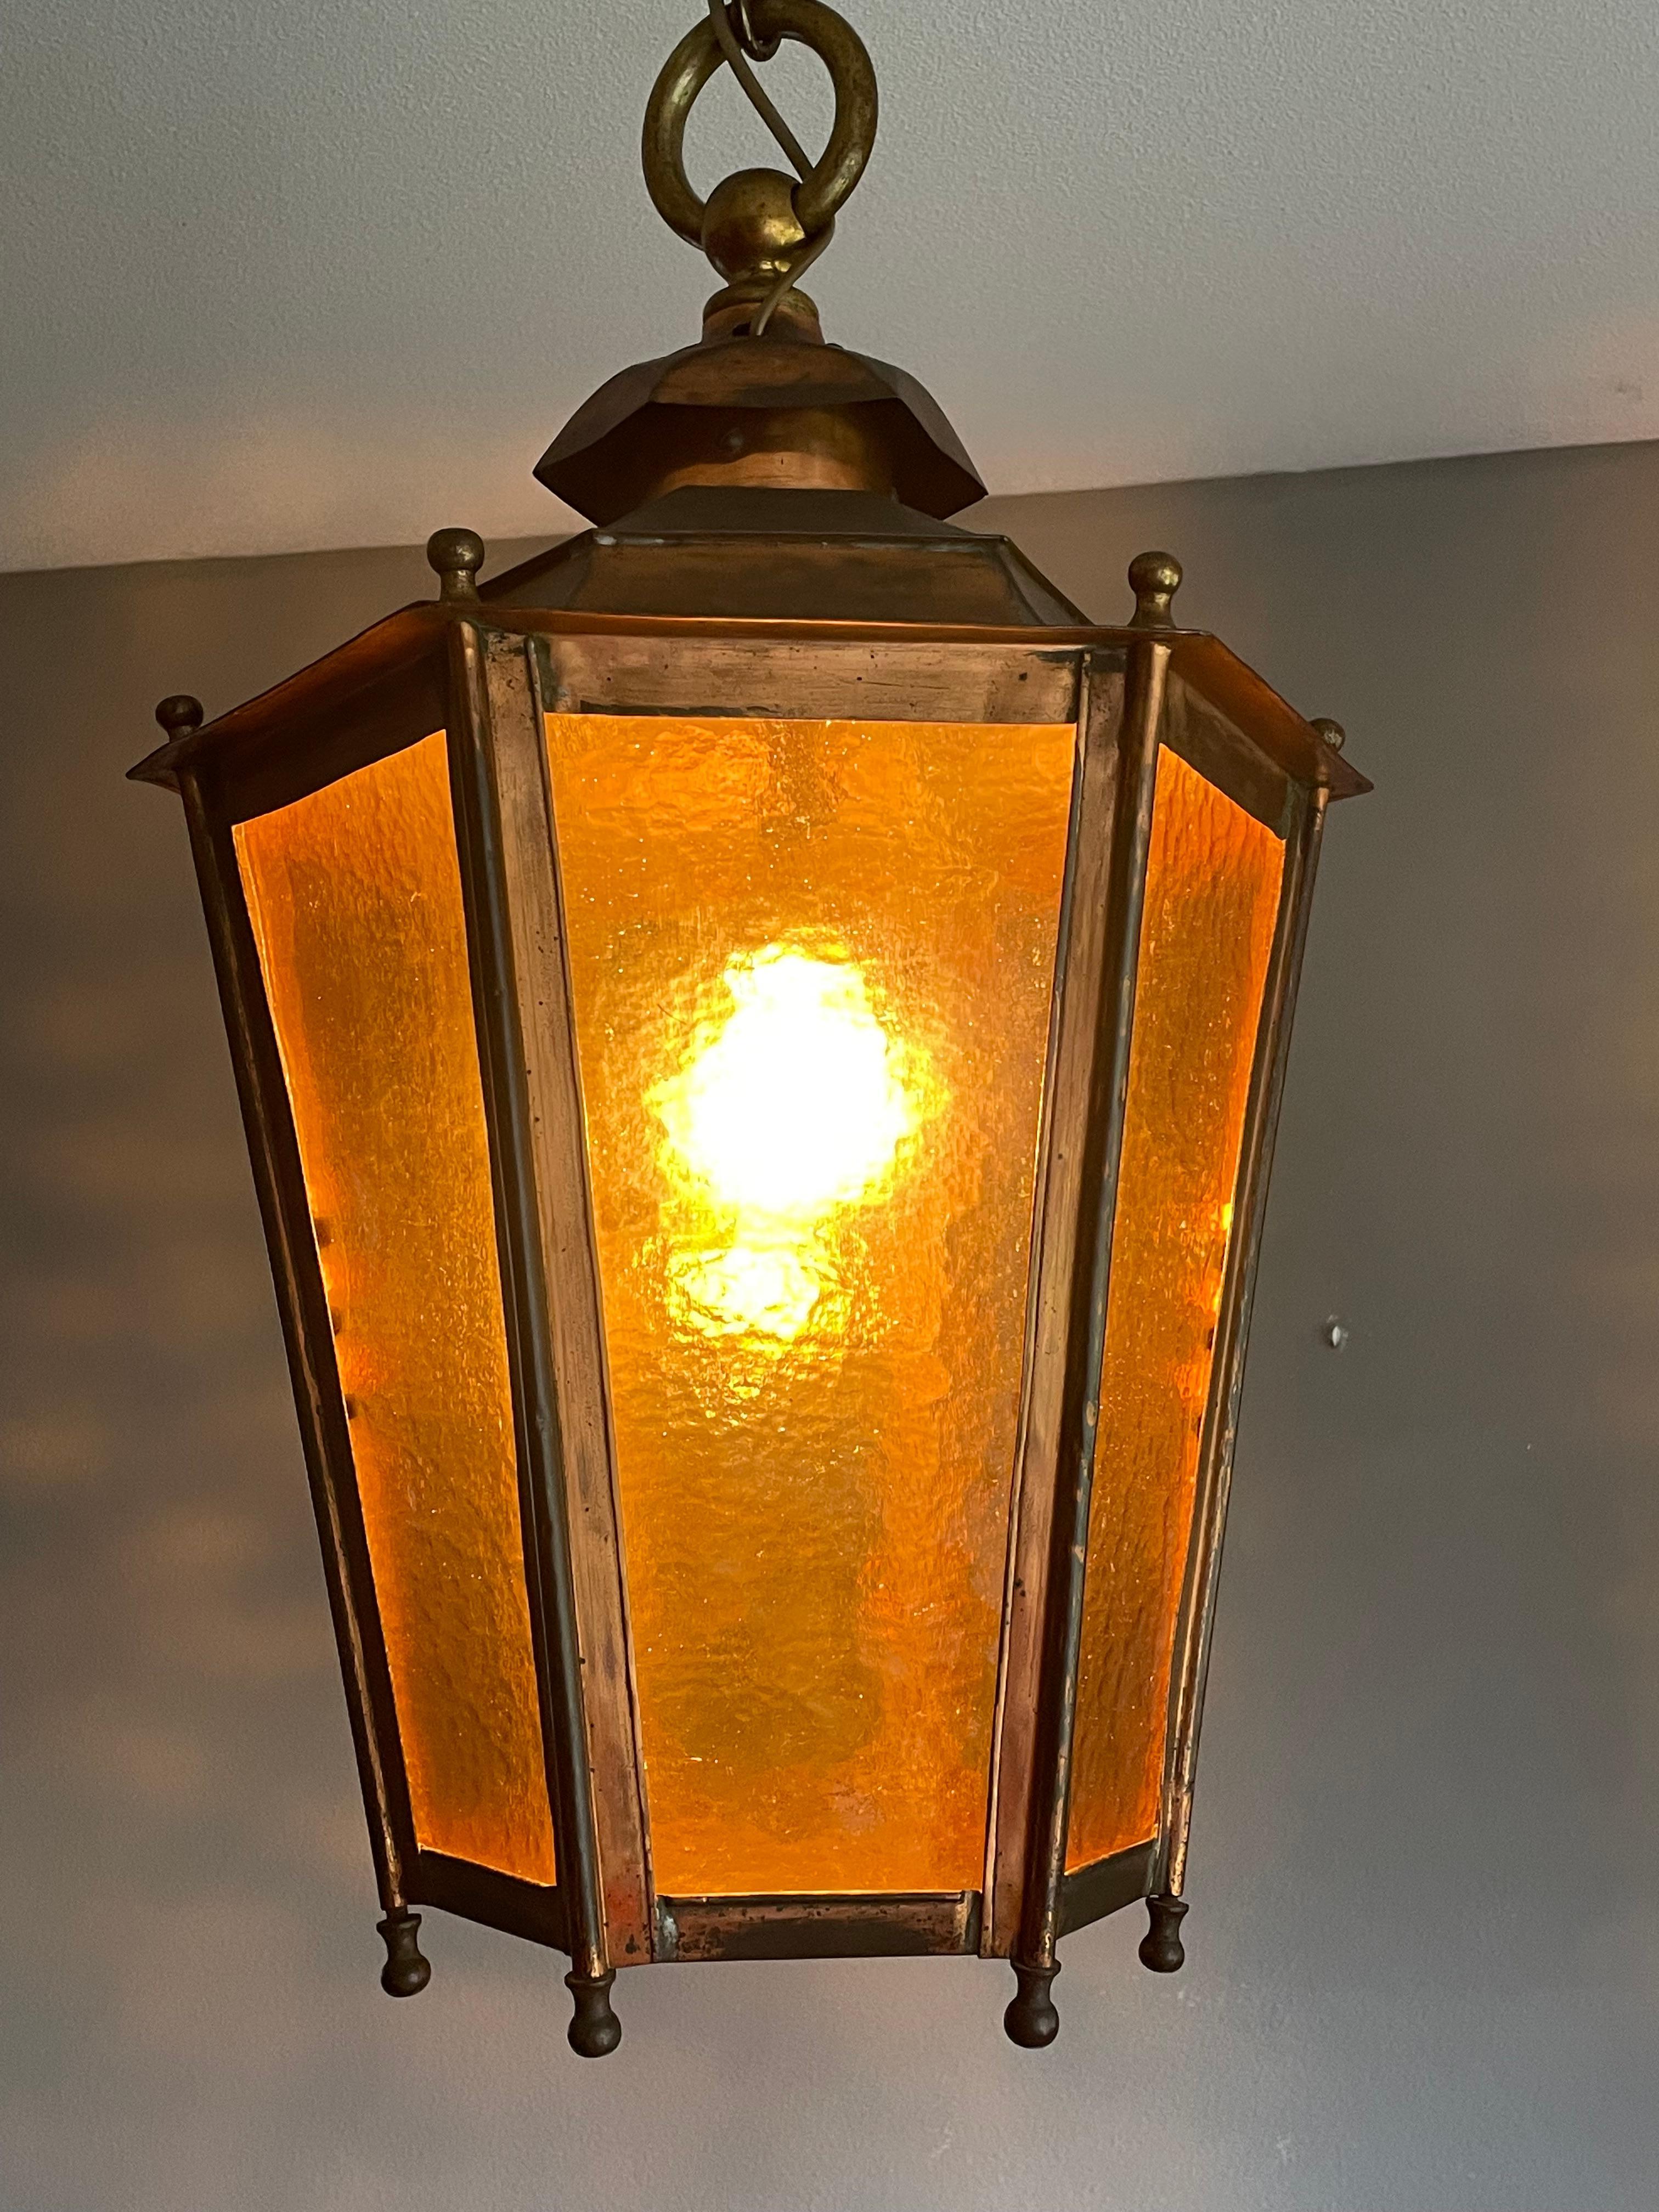 One of a kind, great looking and all handcrafted antique copper pendant with cathedral glass.

With antique light fixtures as one of our specialties, we know how rare large copper lanterns from the late 1800s are and to have found one of this age,